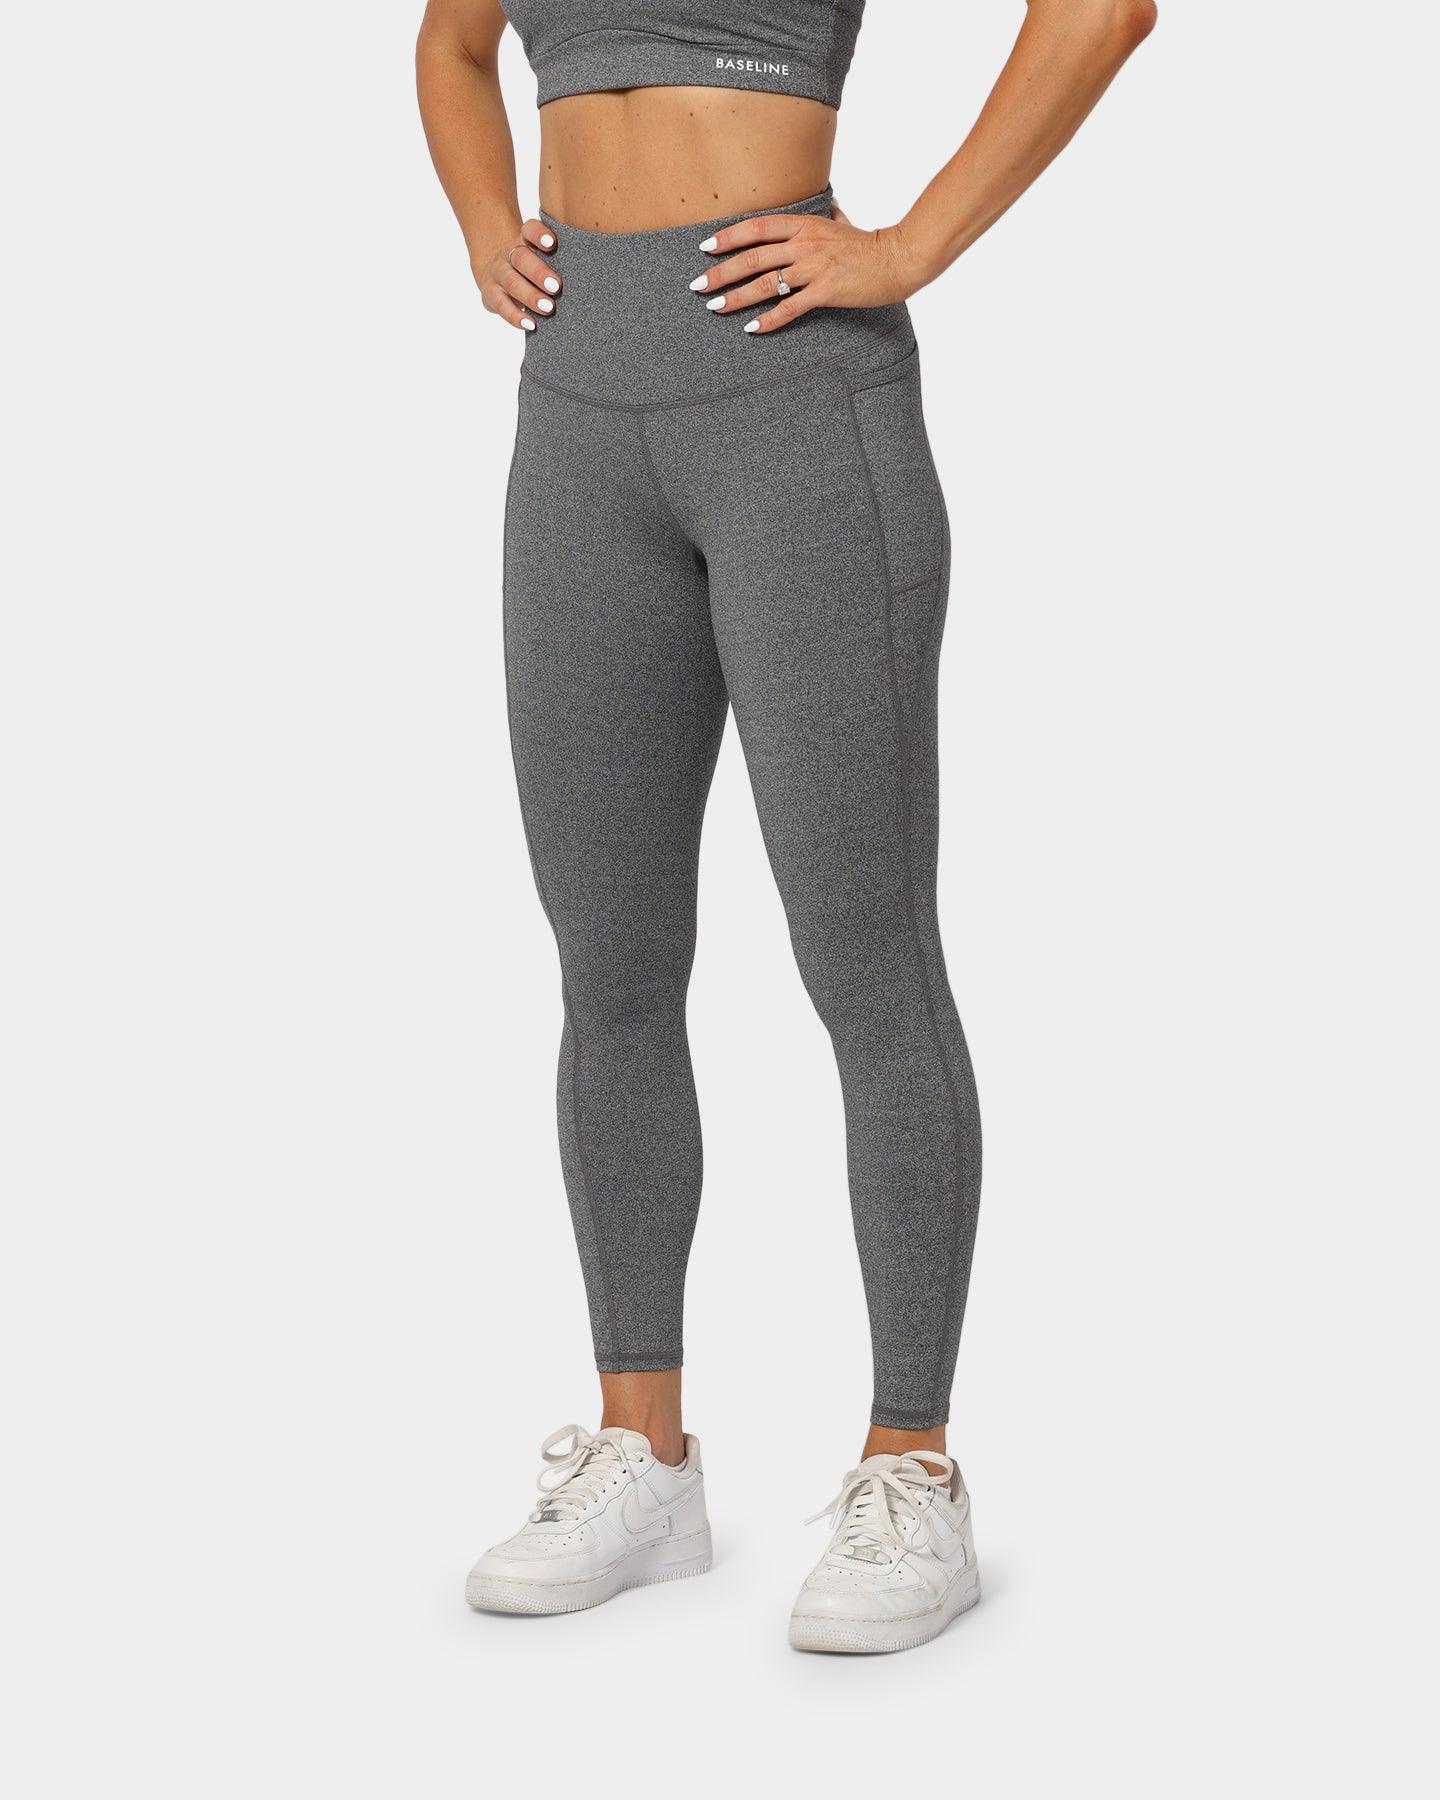 Ultra Support Tights - Baseline Active